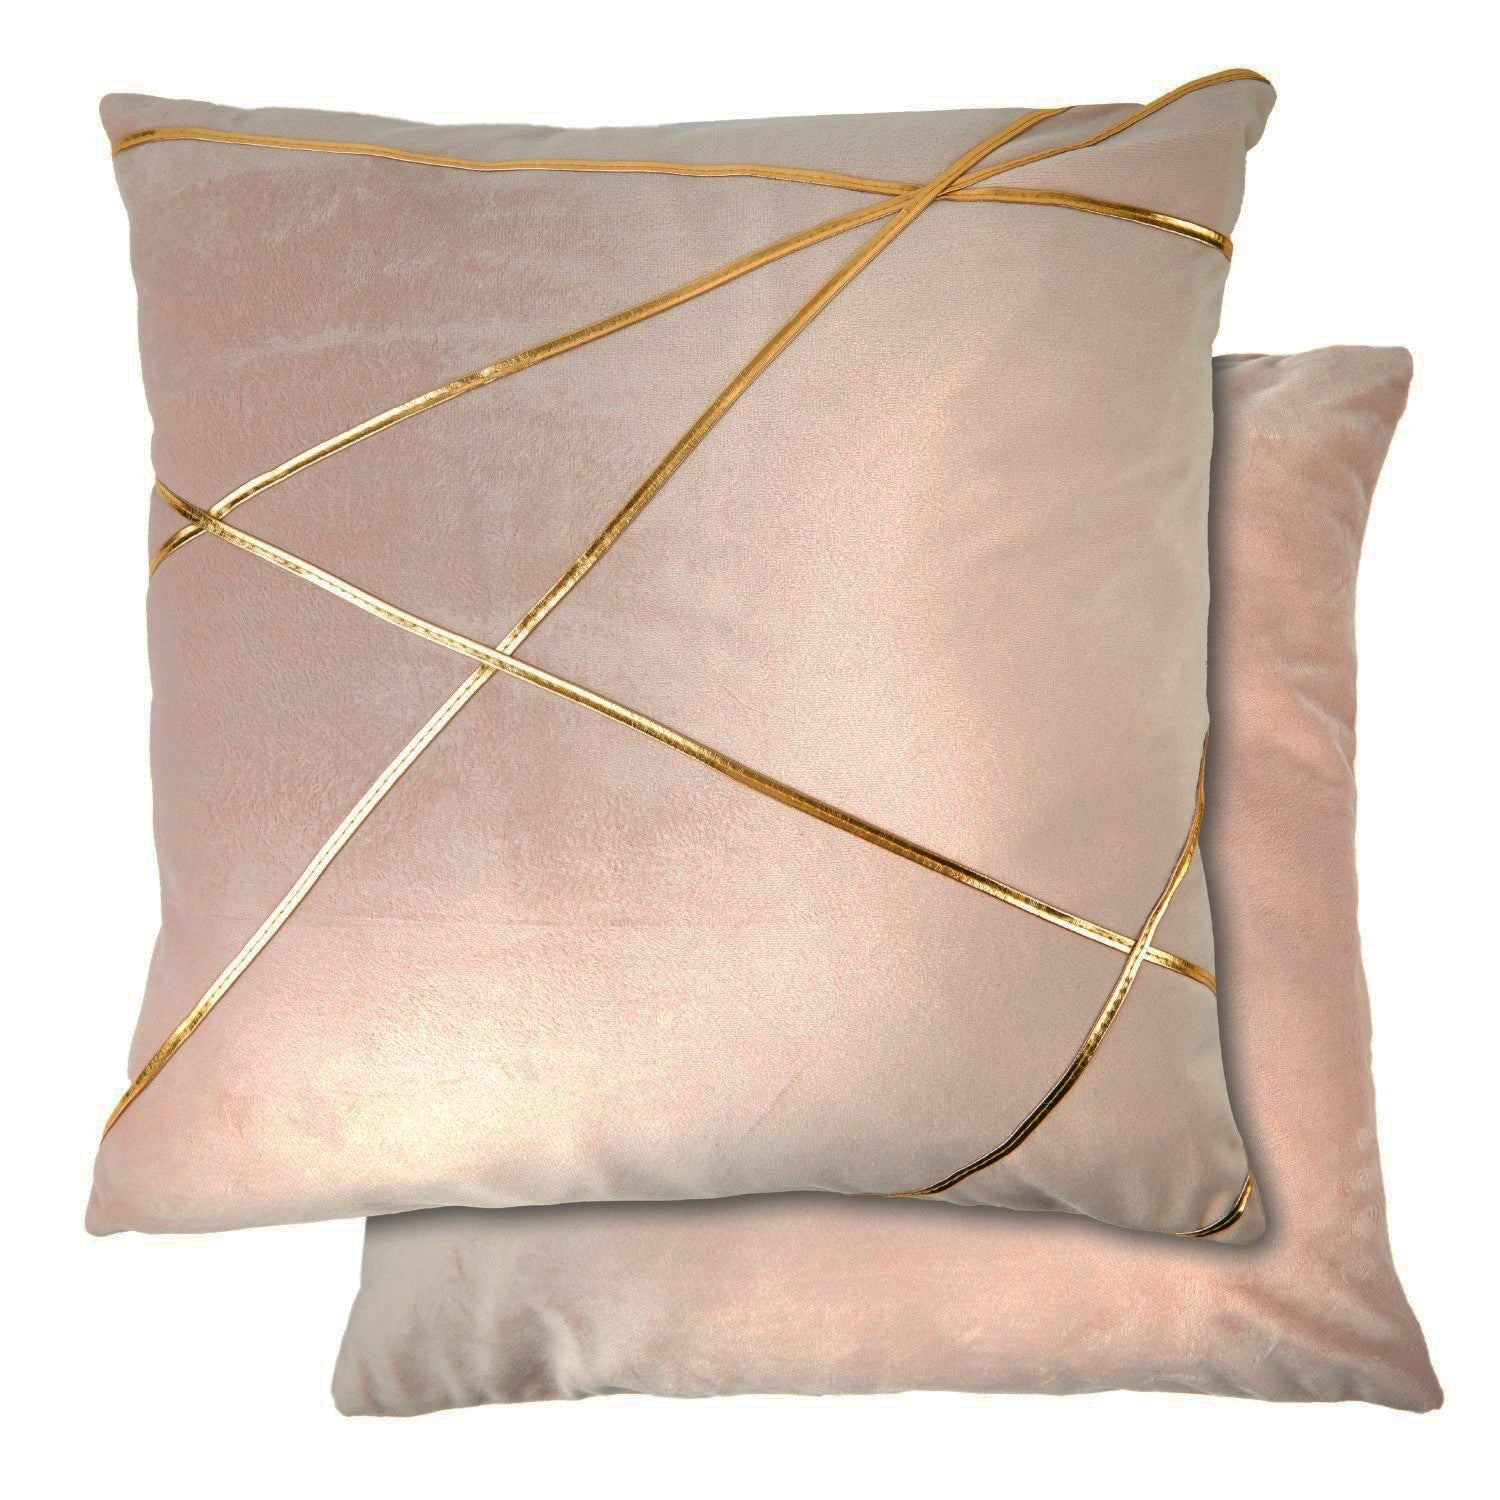 Blush Pink Suede Soft Cushion Covers with Gold Metallic Banding